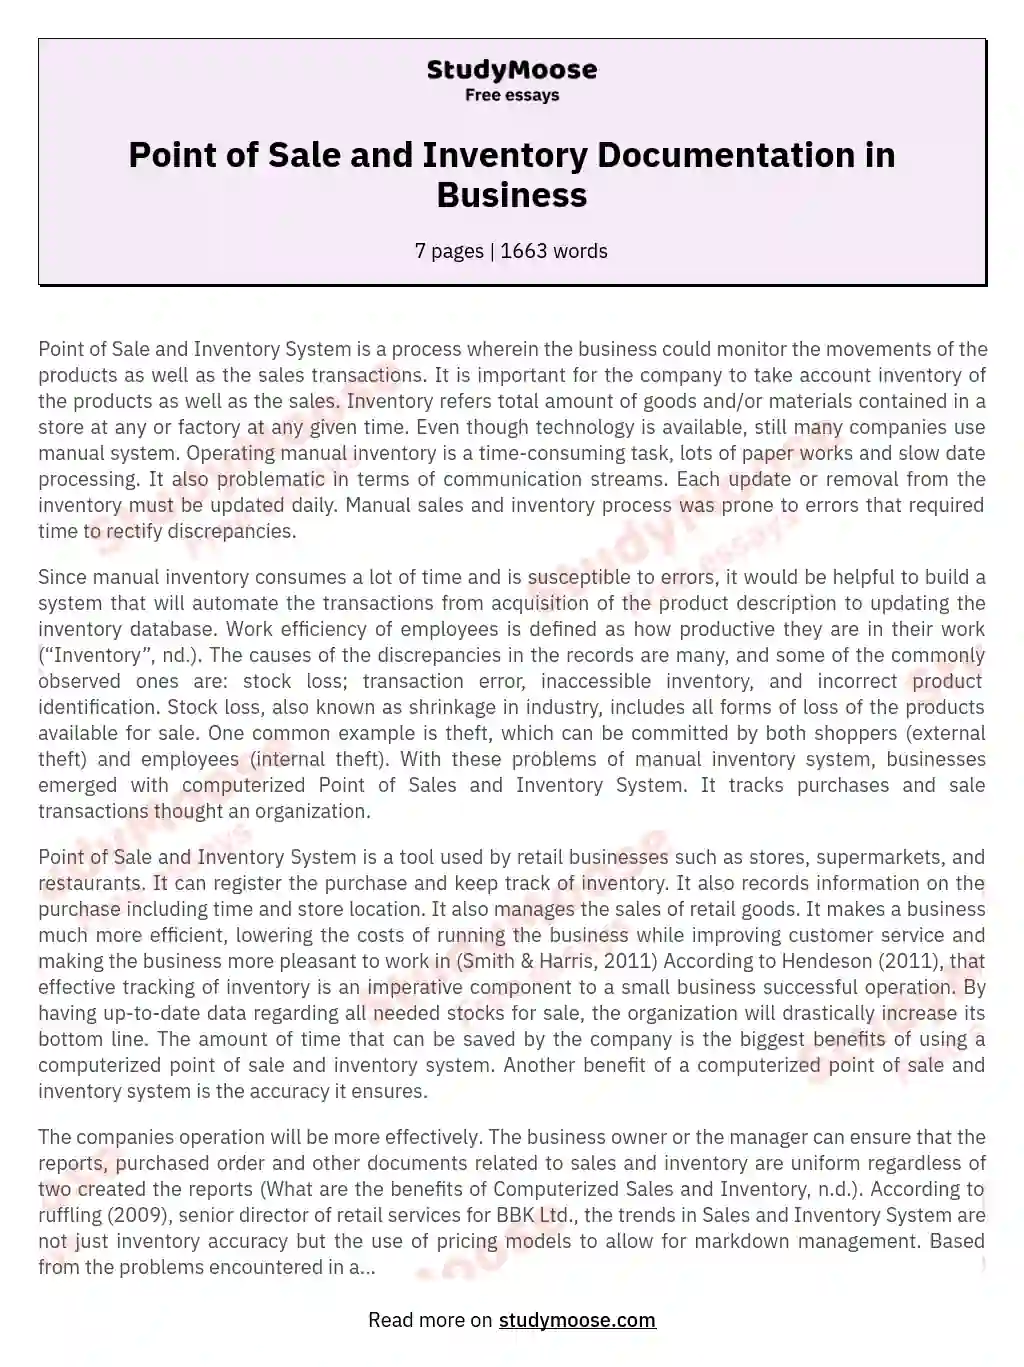 Point of Sale and Inventory Documentation in Business essay